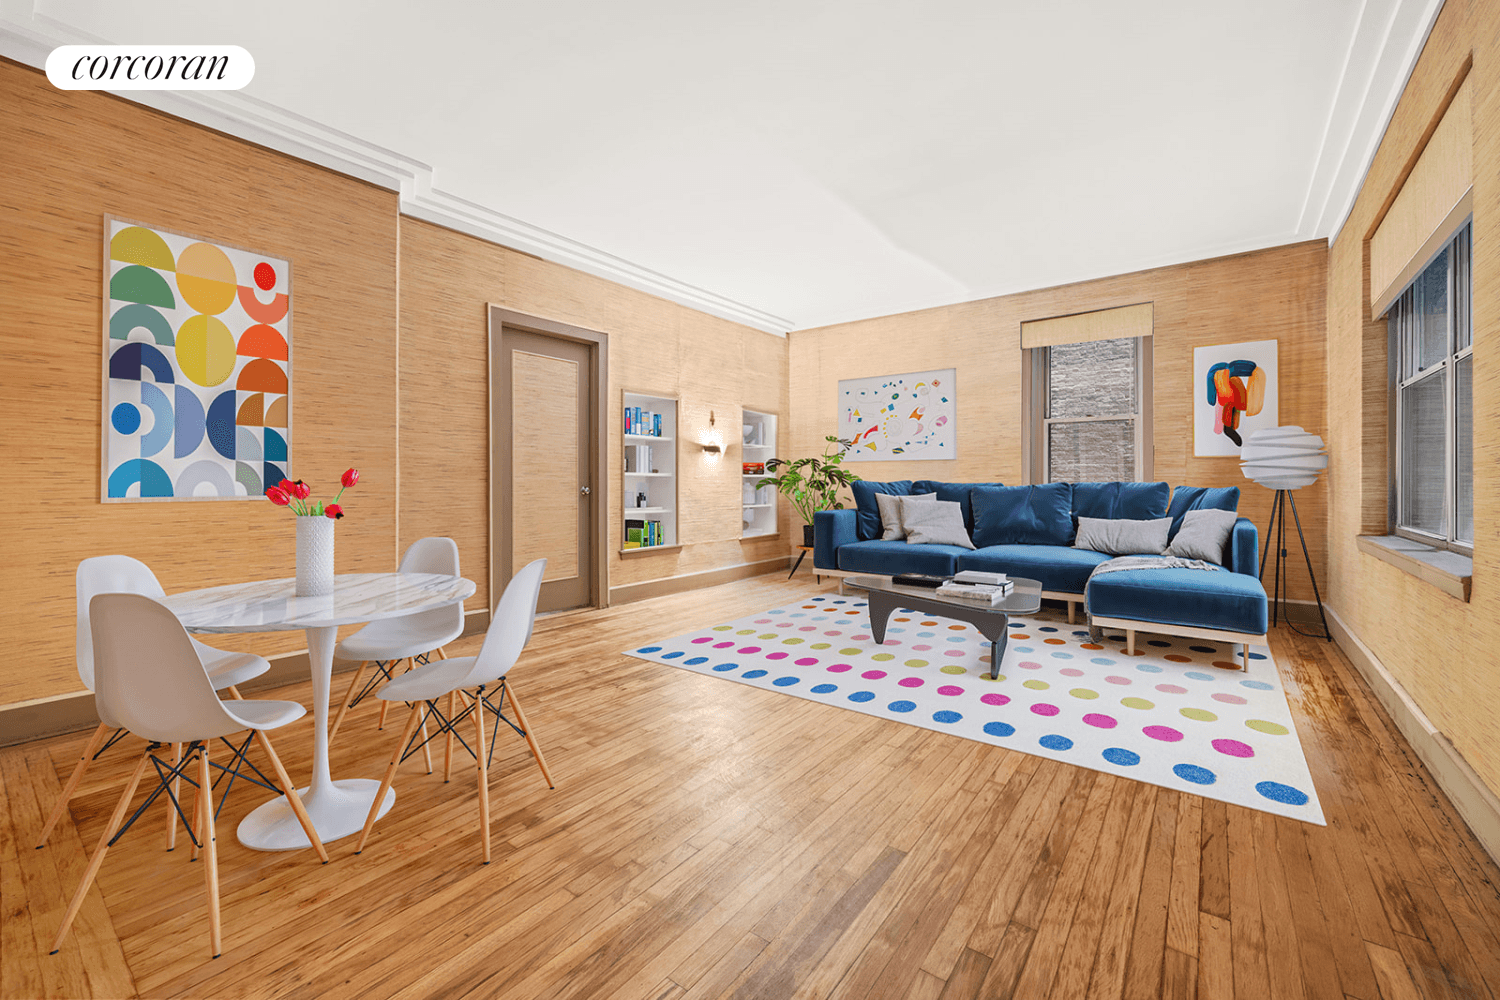 PRICE REDUCED ! Apartment 4B at 57 West 58th Street, is a well priced, spacious one bedroom, one bathroom pre war Condo home, close to Central Park and Fifth Ave.